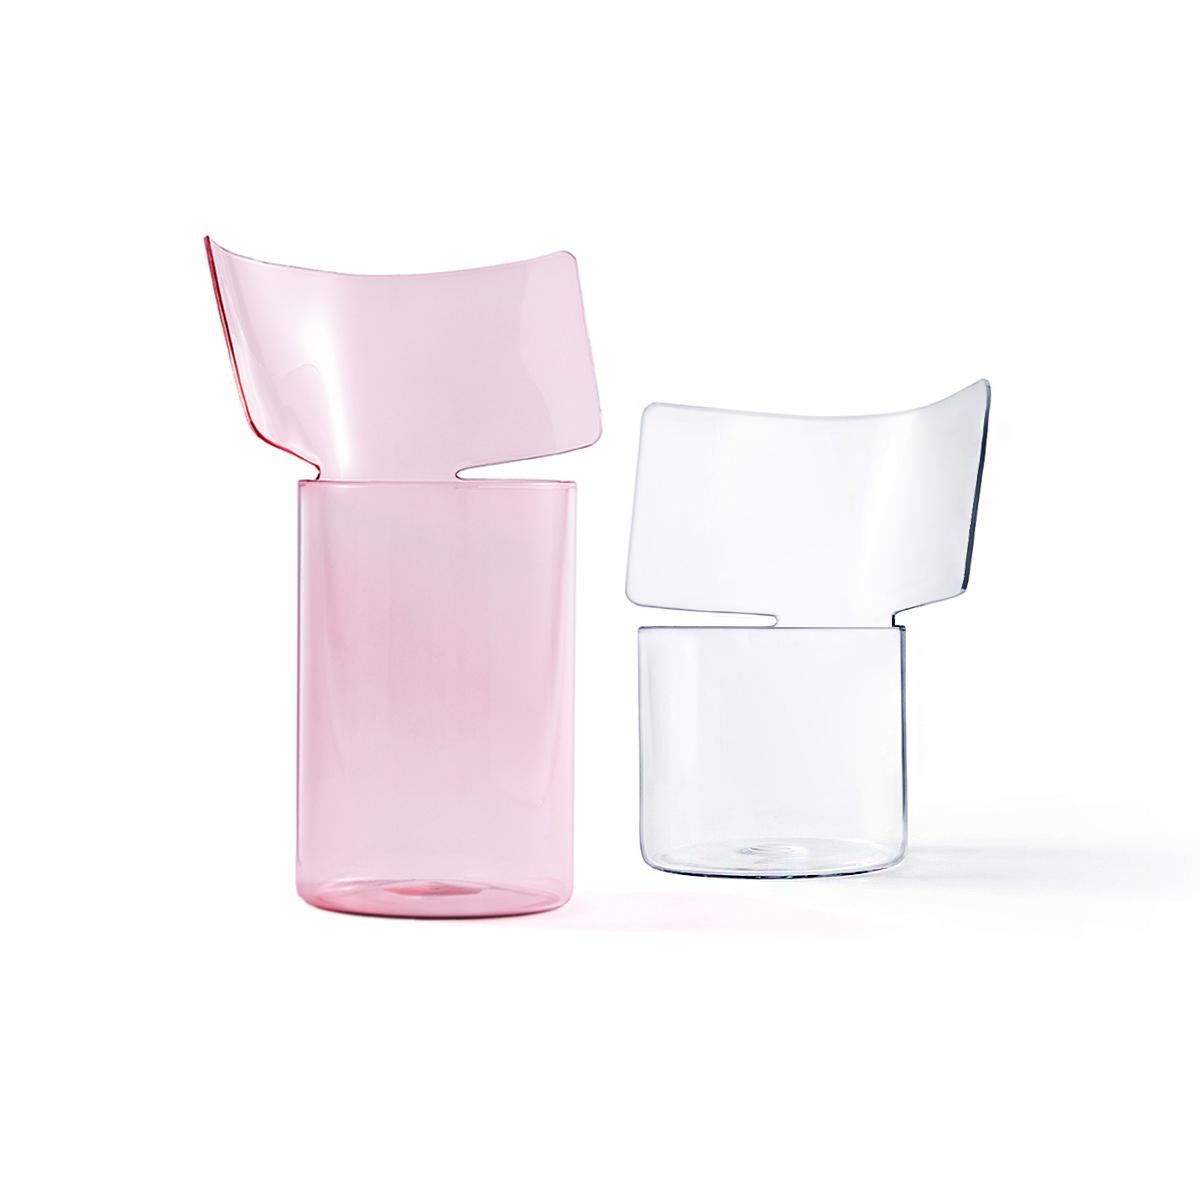 Riflessi is a project by Böjte-Bottari for Paola C. presented in 2017.
This vase is designed to accommodate all types of flowers, and it is made in pink blown borosilicate glass. The collection includes two formats (low or high) and three possible